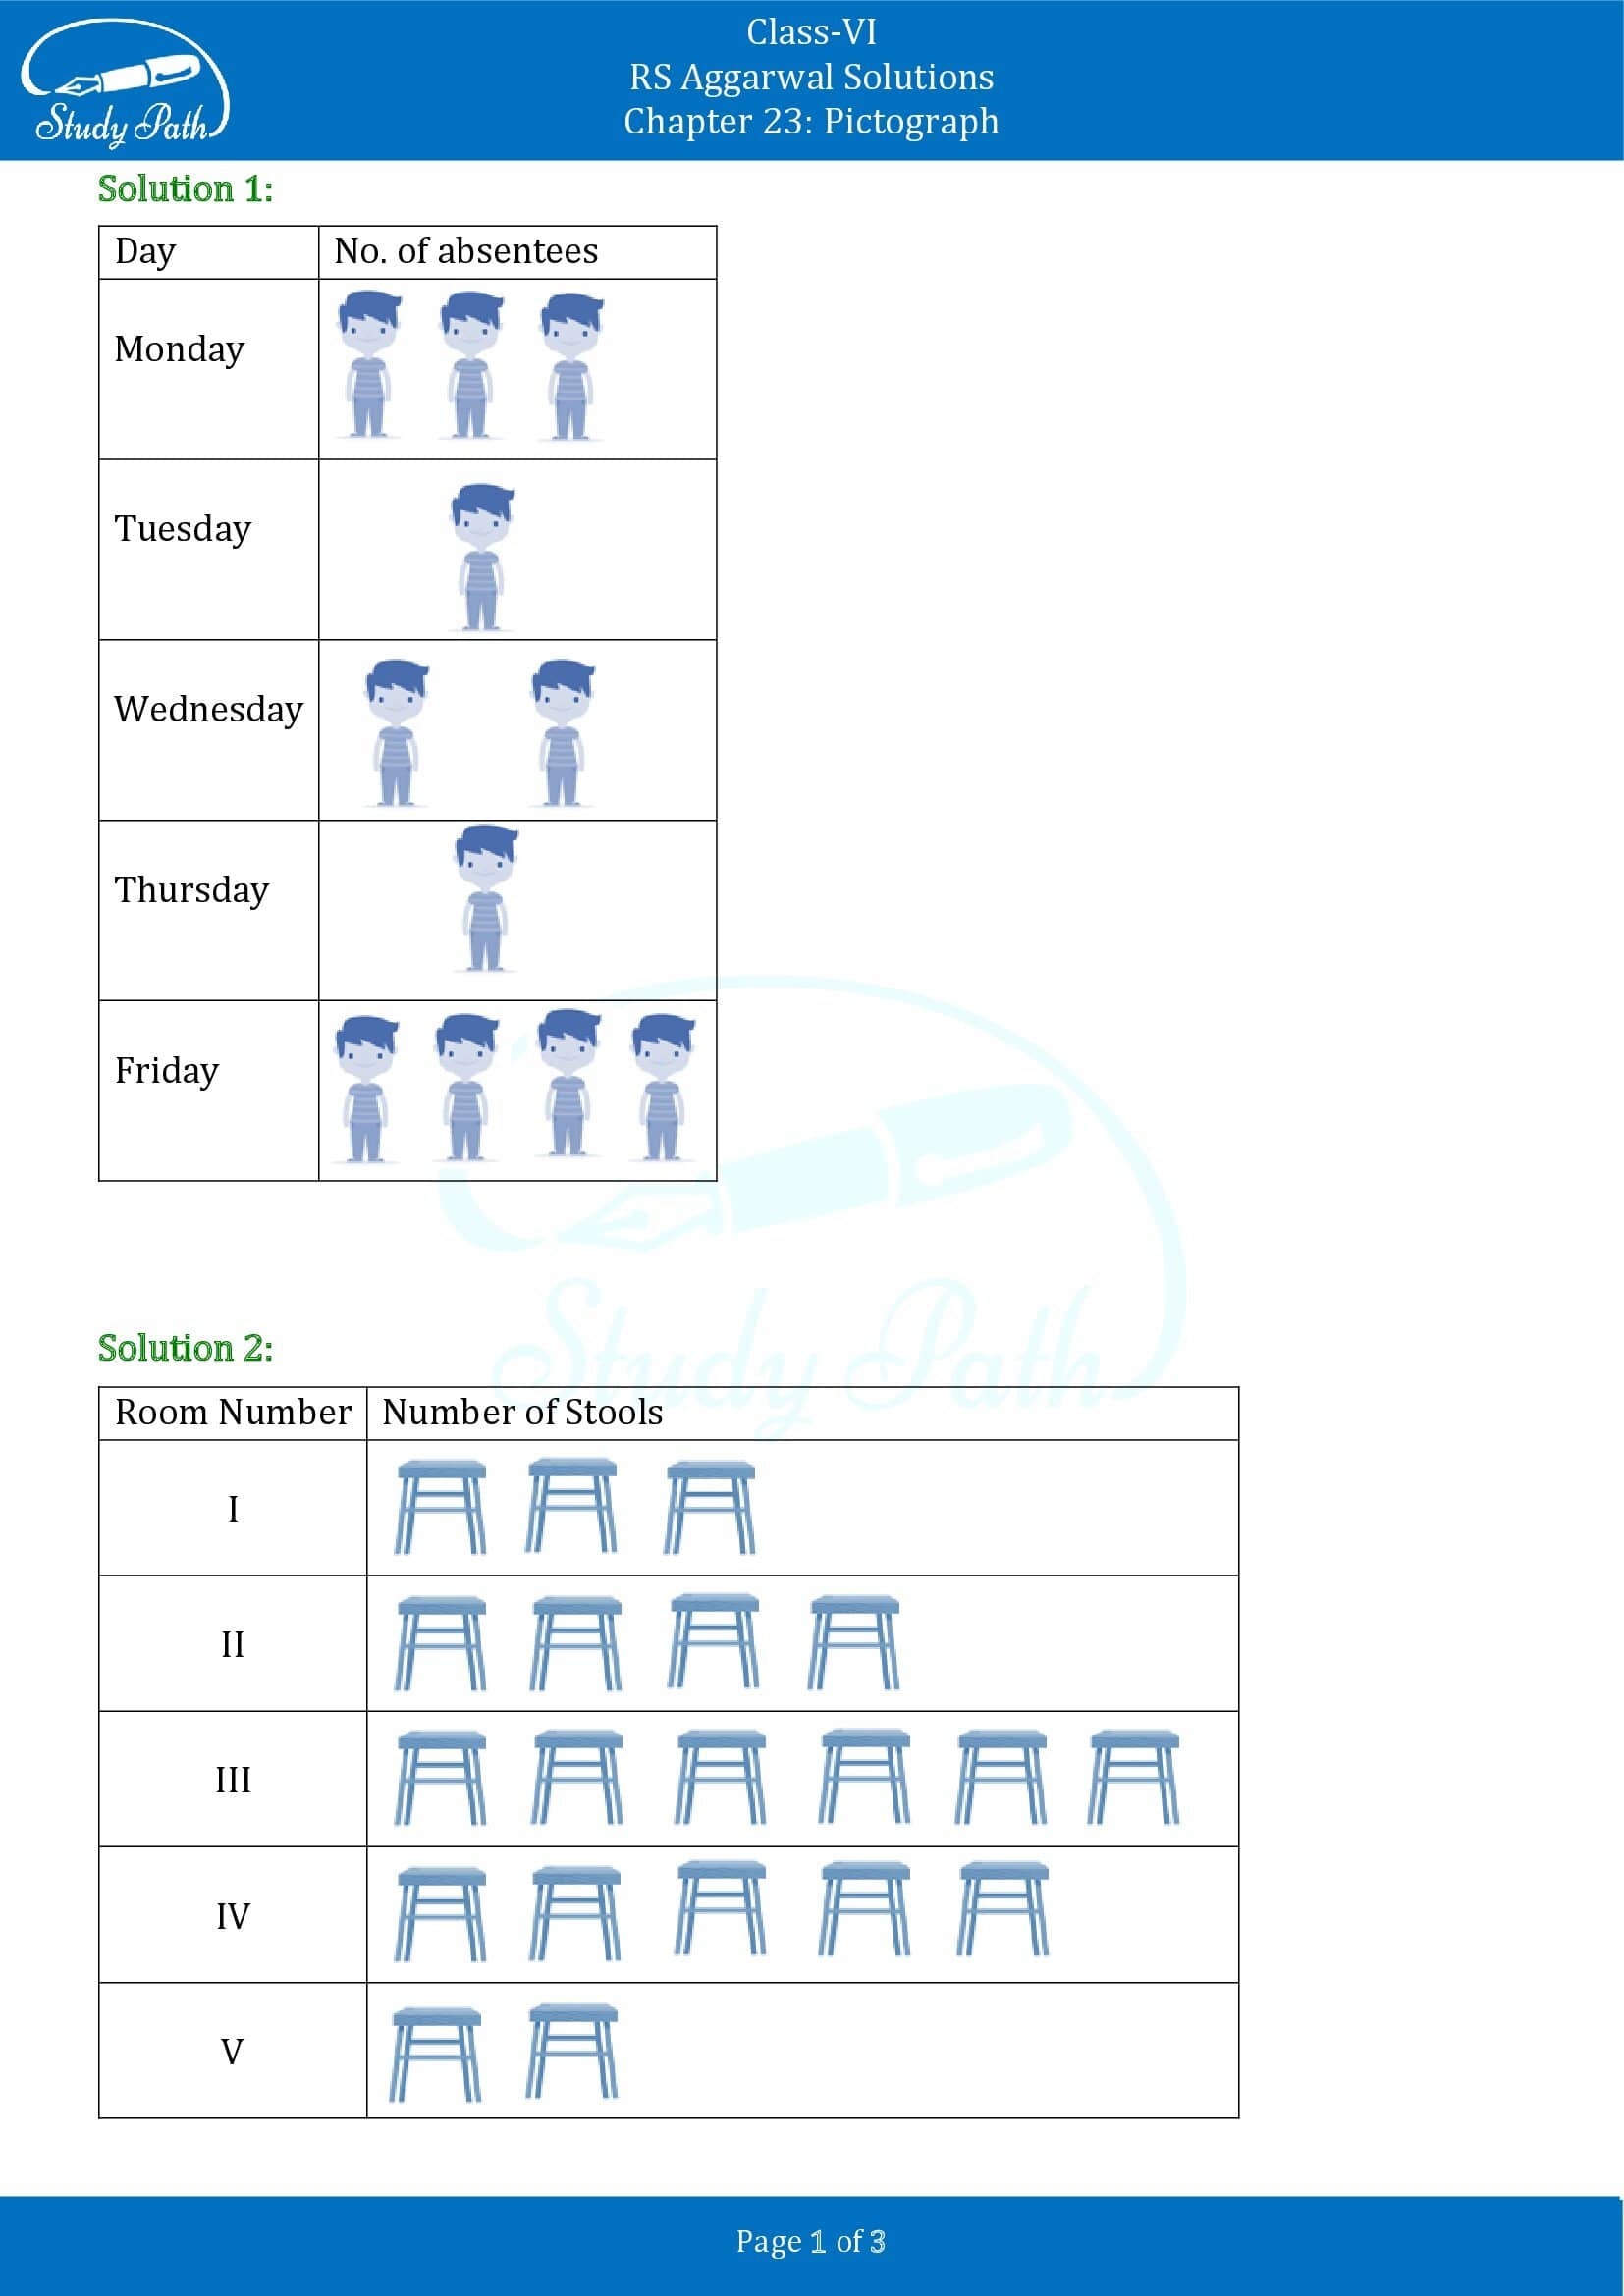 RS Aggarwal Solutions Class 6 Chapter 23 Pictograph 00001